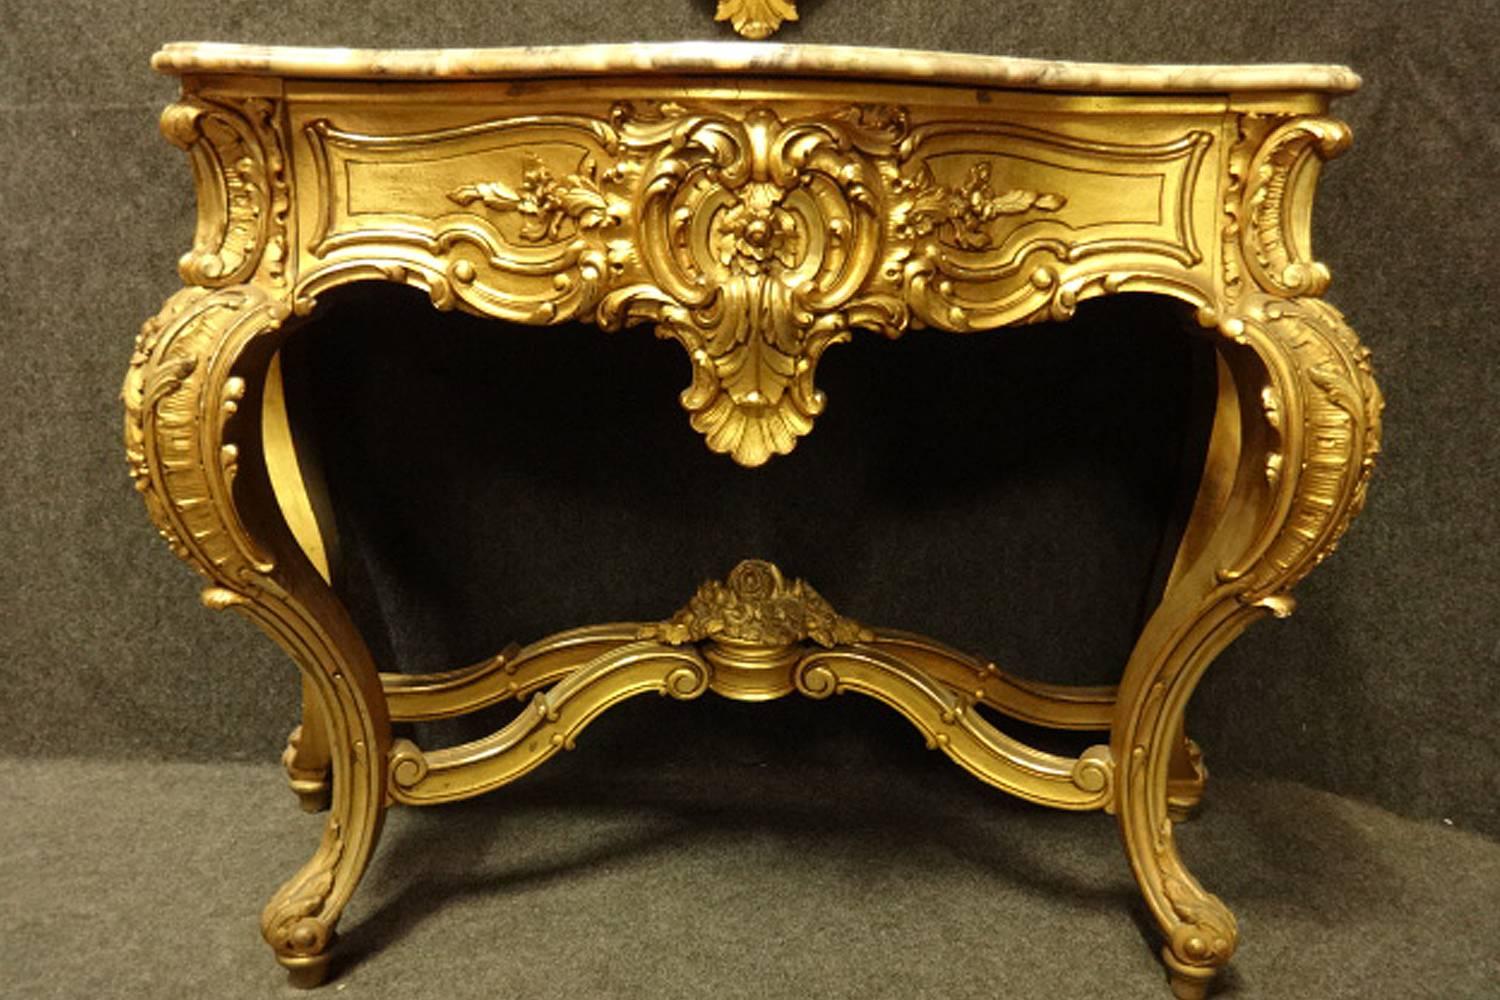 French Gilt amd Marble Topped Console Table with Matching Mirror early C20th In Good Condition For Sale In Applyby Magna, Staffordshire